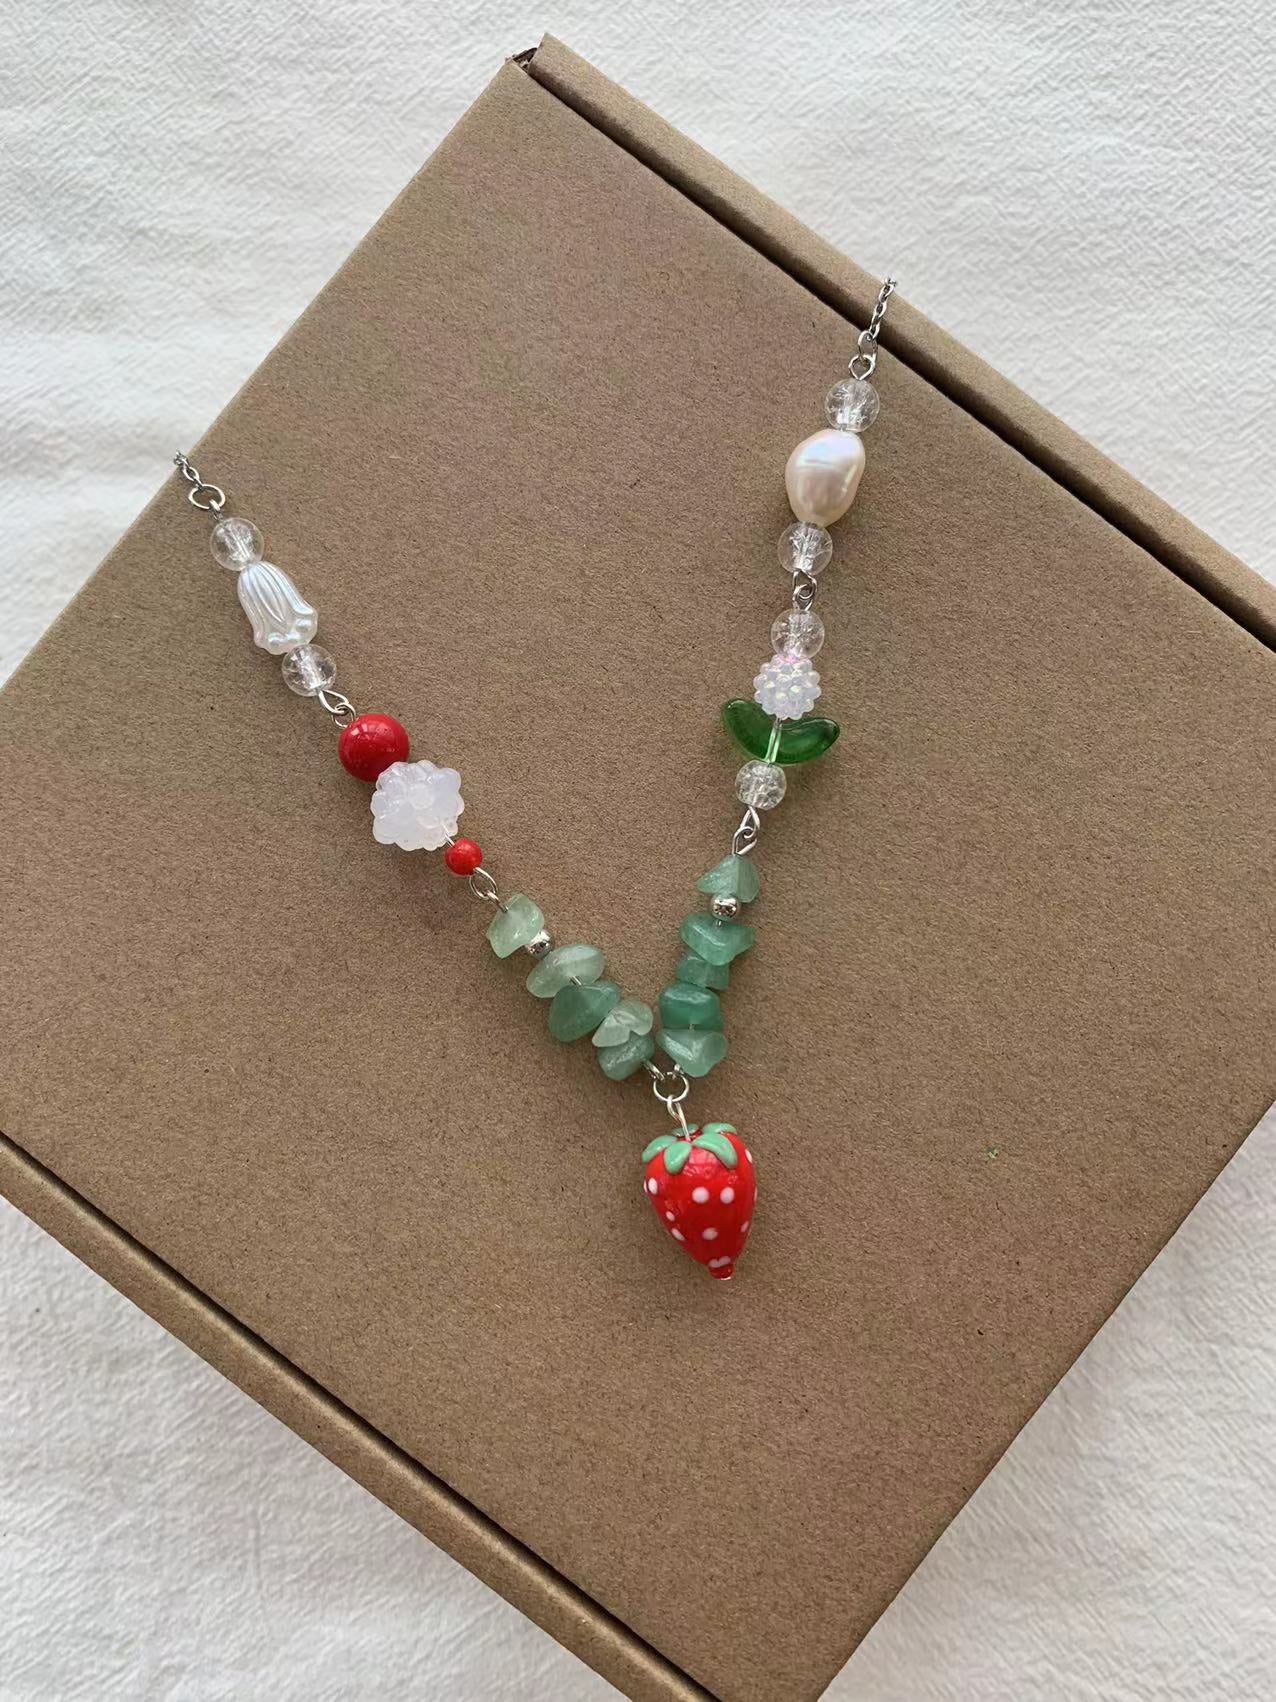 Red strawberry necklace